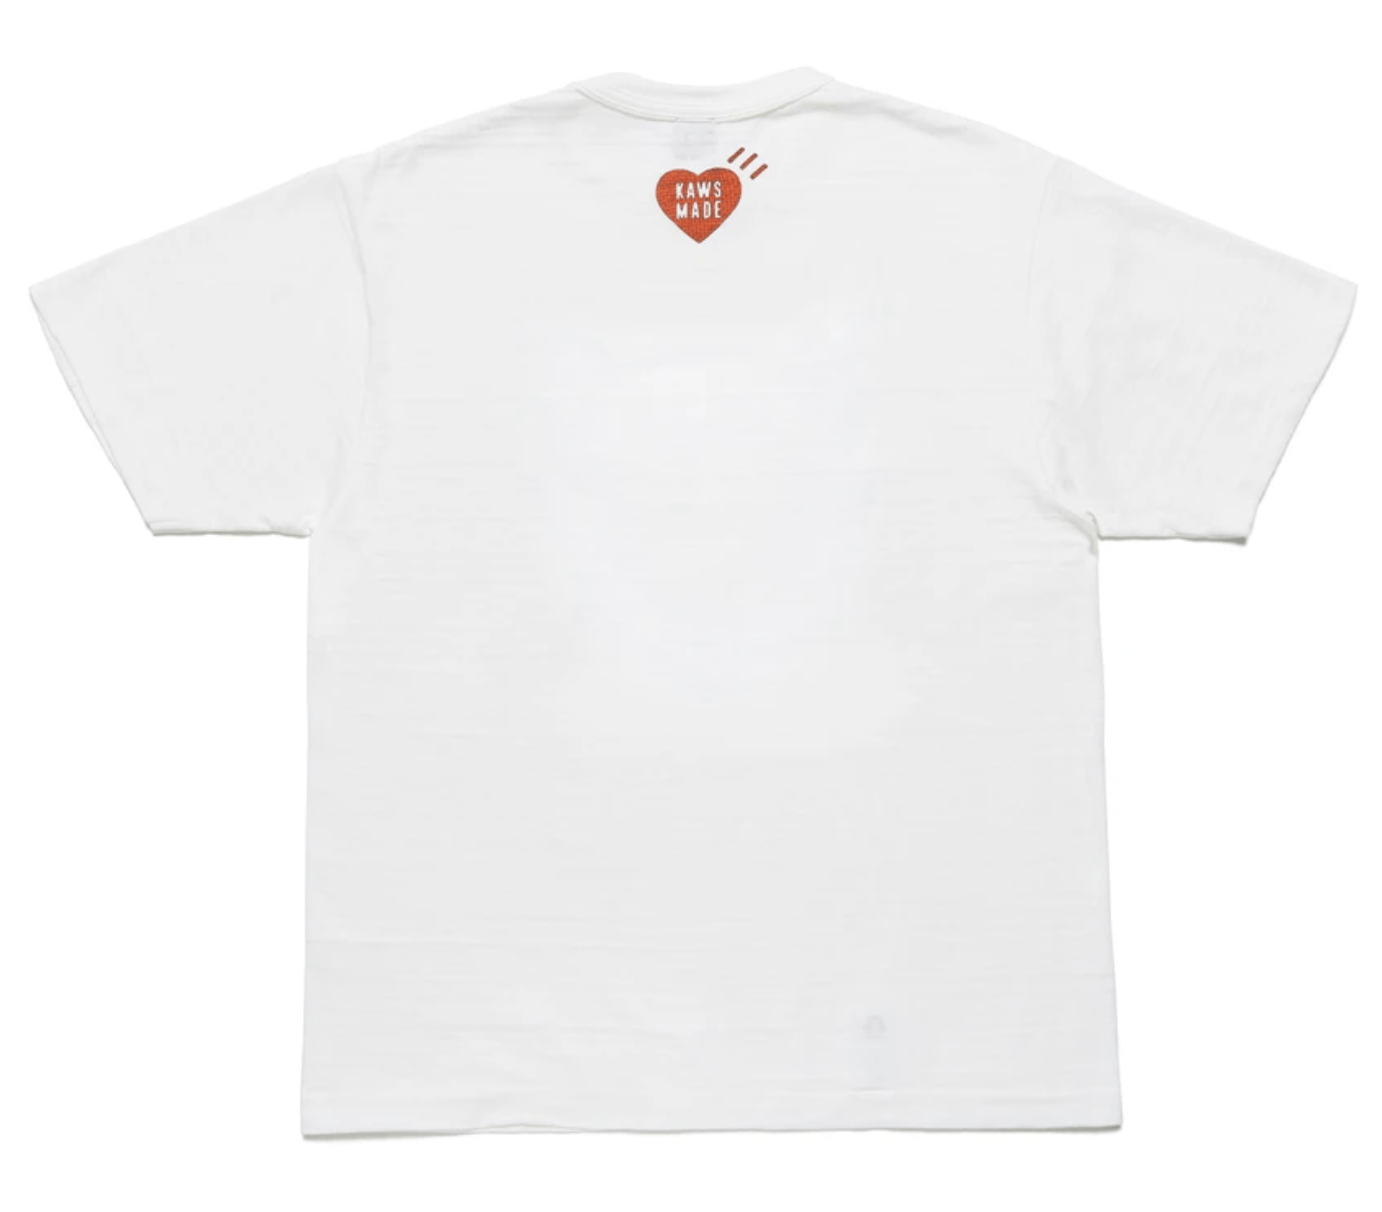 Human Made NEW Human made x Kaws T-shirt #1 Size Large White cotton |  Grailed